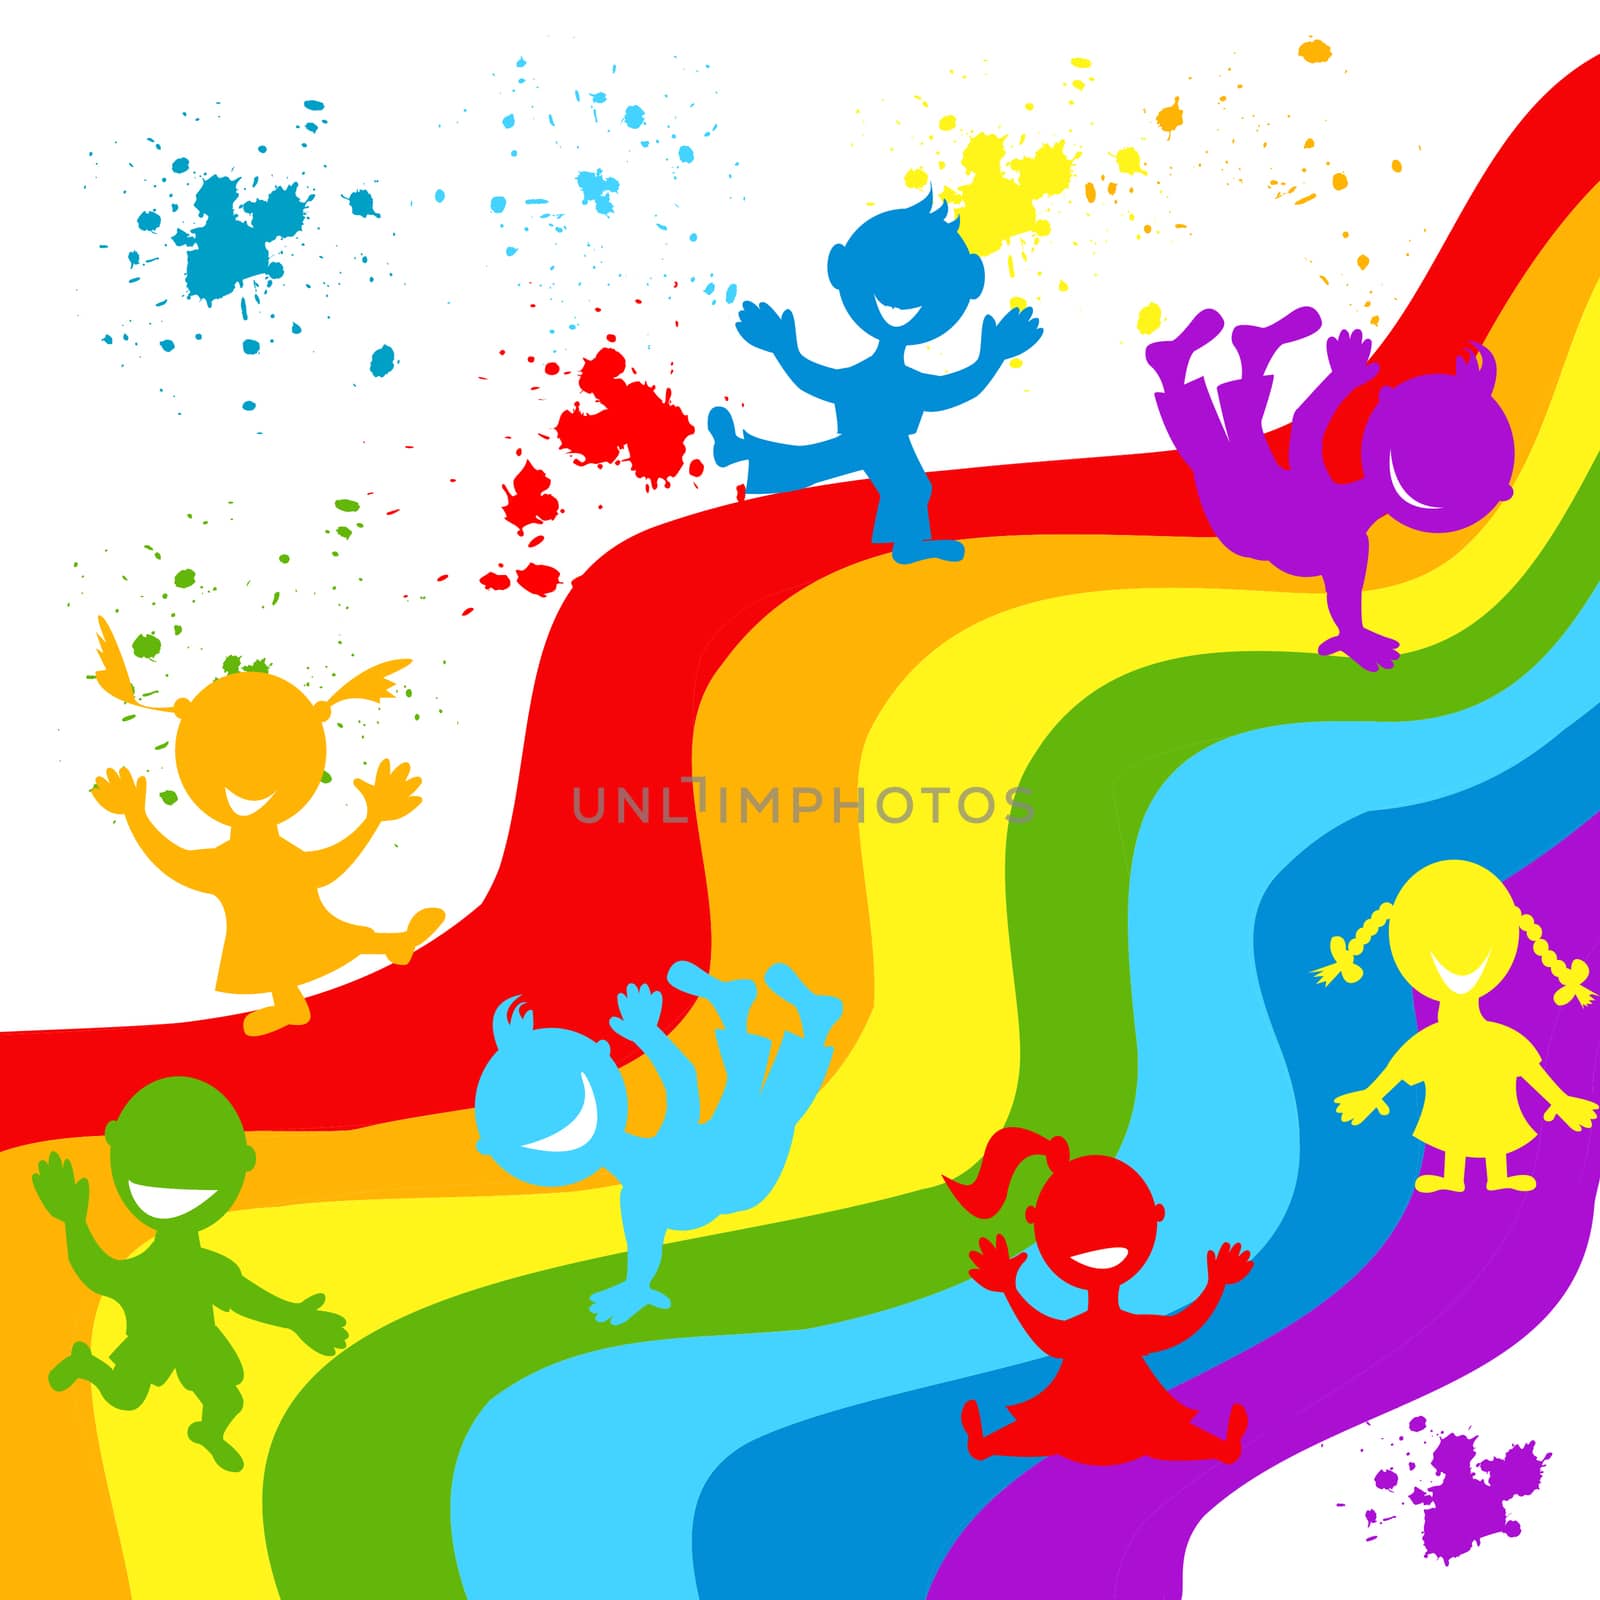 Hand drown children silhouettes in rainbow colors by hibrida13